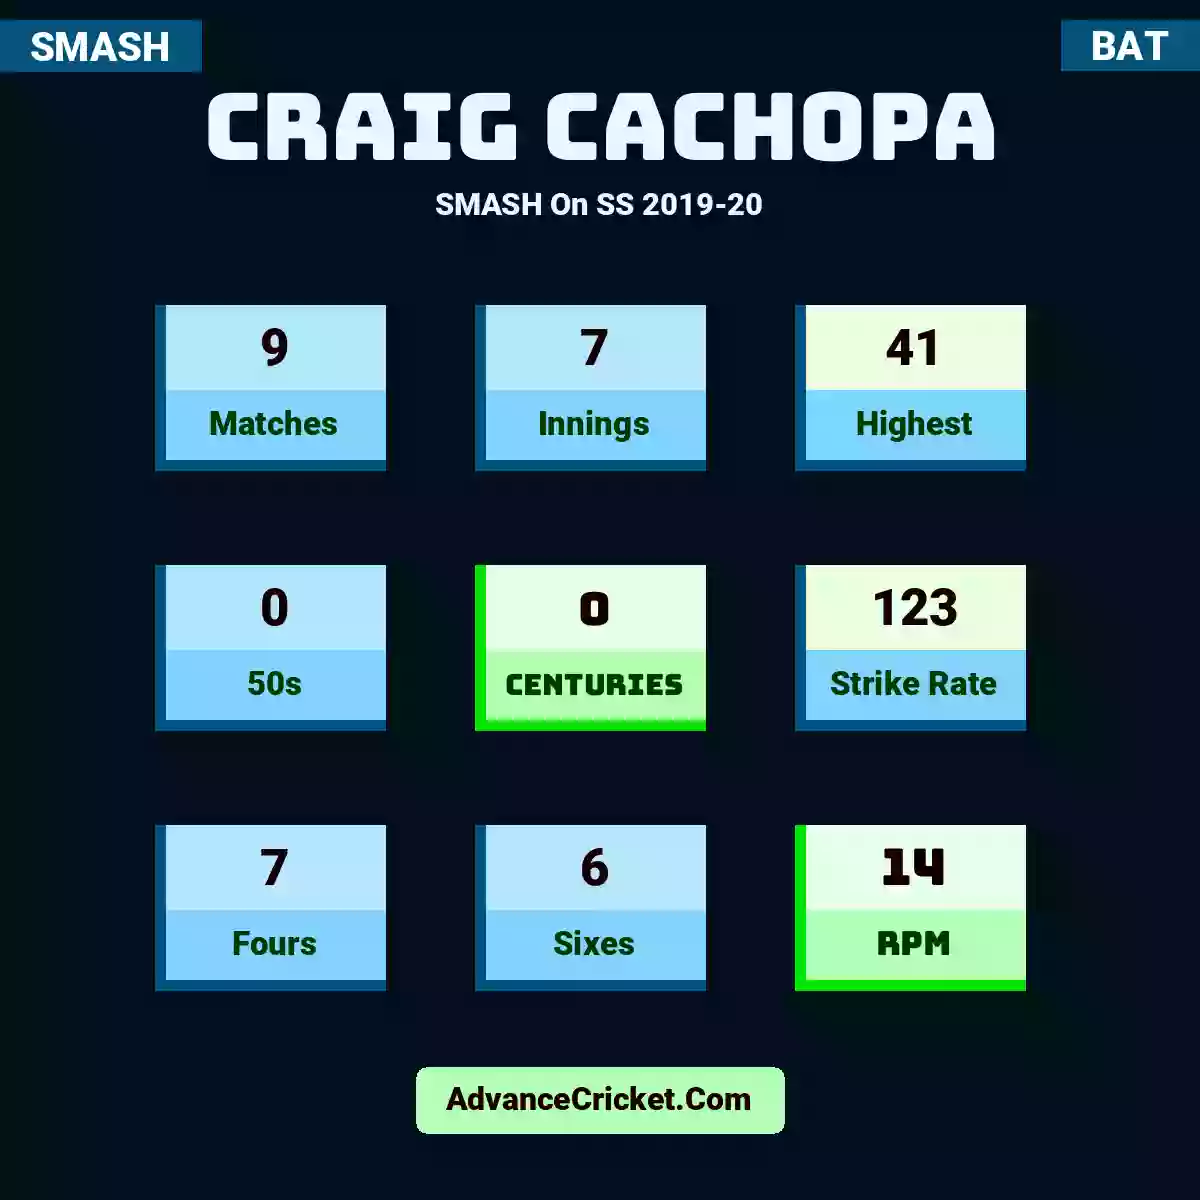 Craig Cachopa SMASH  On SS 2019-20, Craig Cachopa played 9 matches, scored 41 runs as highest, 0 half-centuries, and 0 centuries, with a strike rate of 123. C.Cachopa hit 7 fours and 6 sixes, with an RPM of 14.